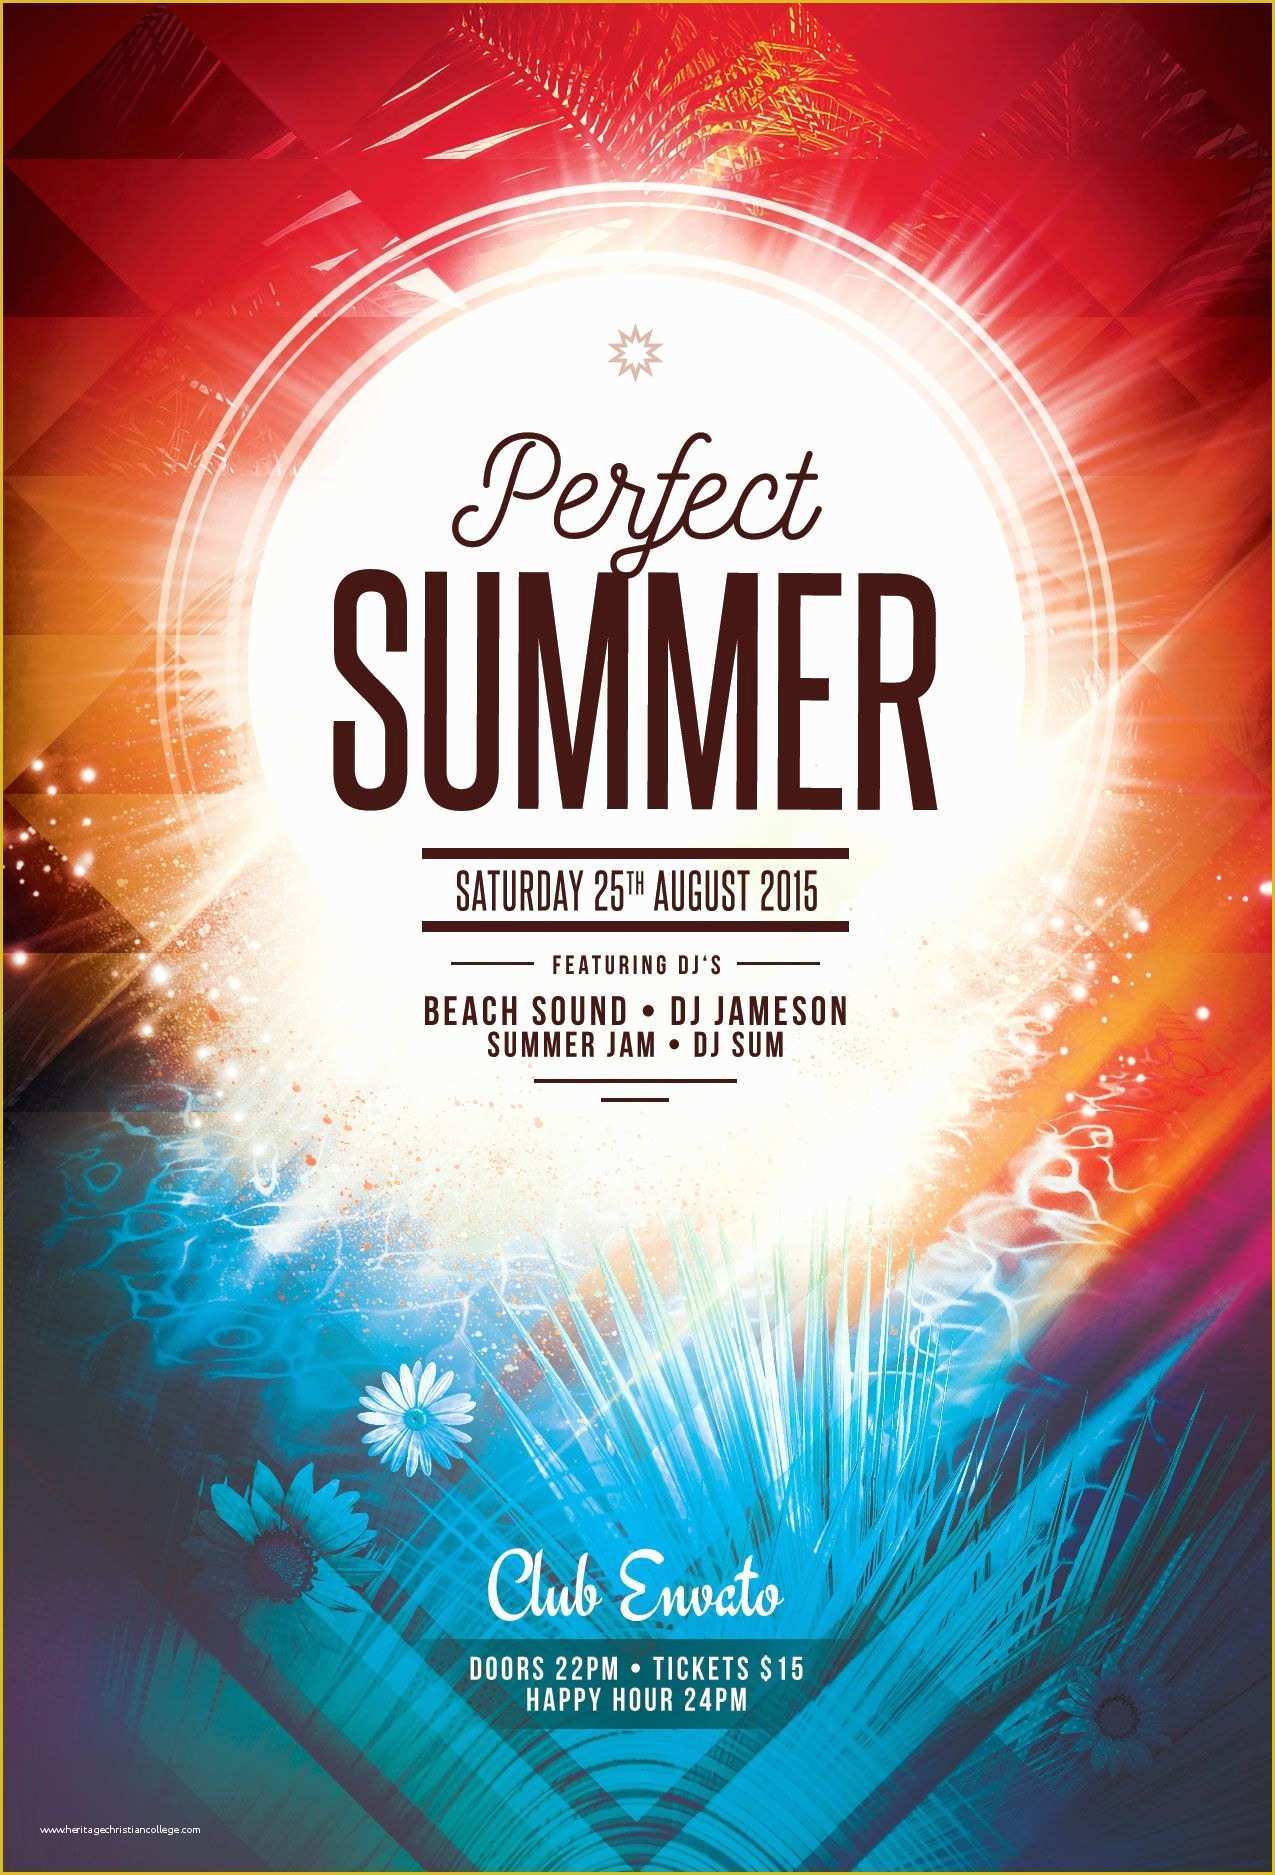 Free Graphic Templates Of Perfect Summer Flyer Template Download Psd File $6